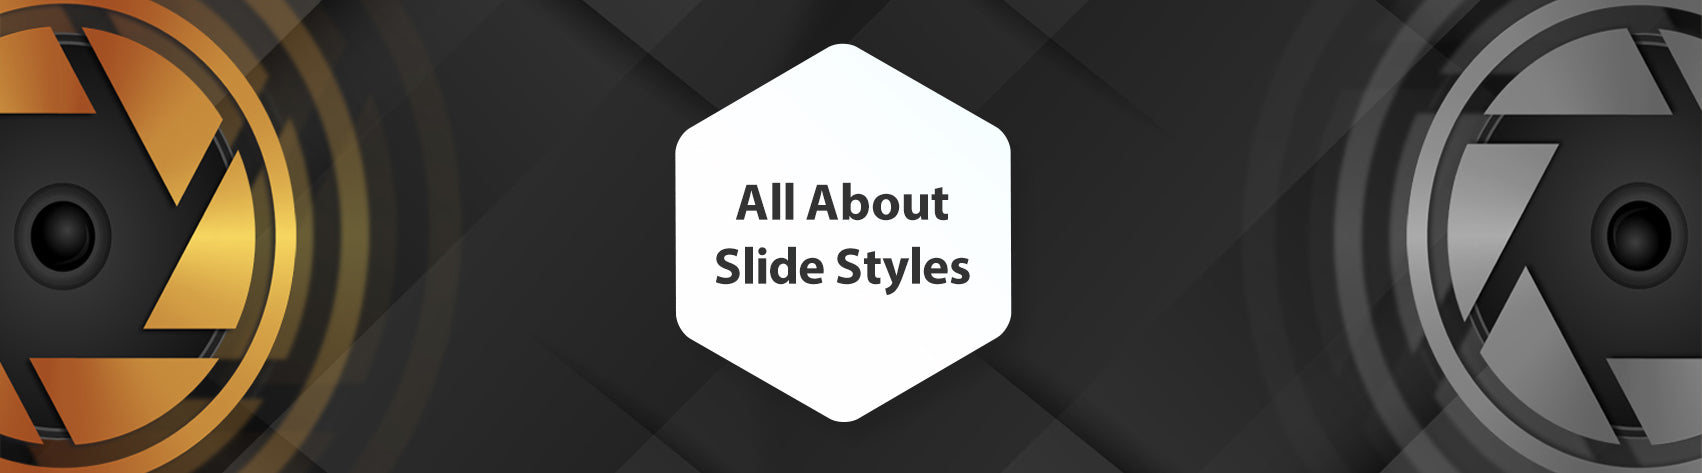 Lesson - All About Slide Styles